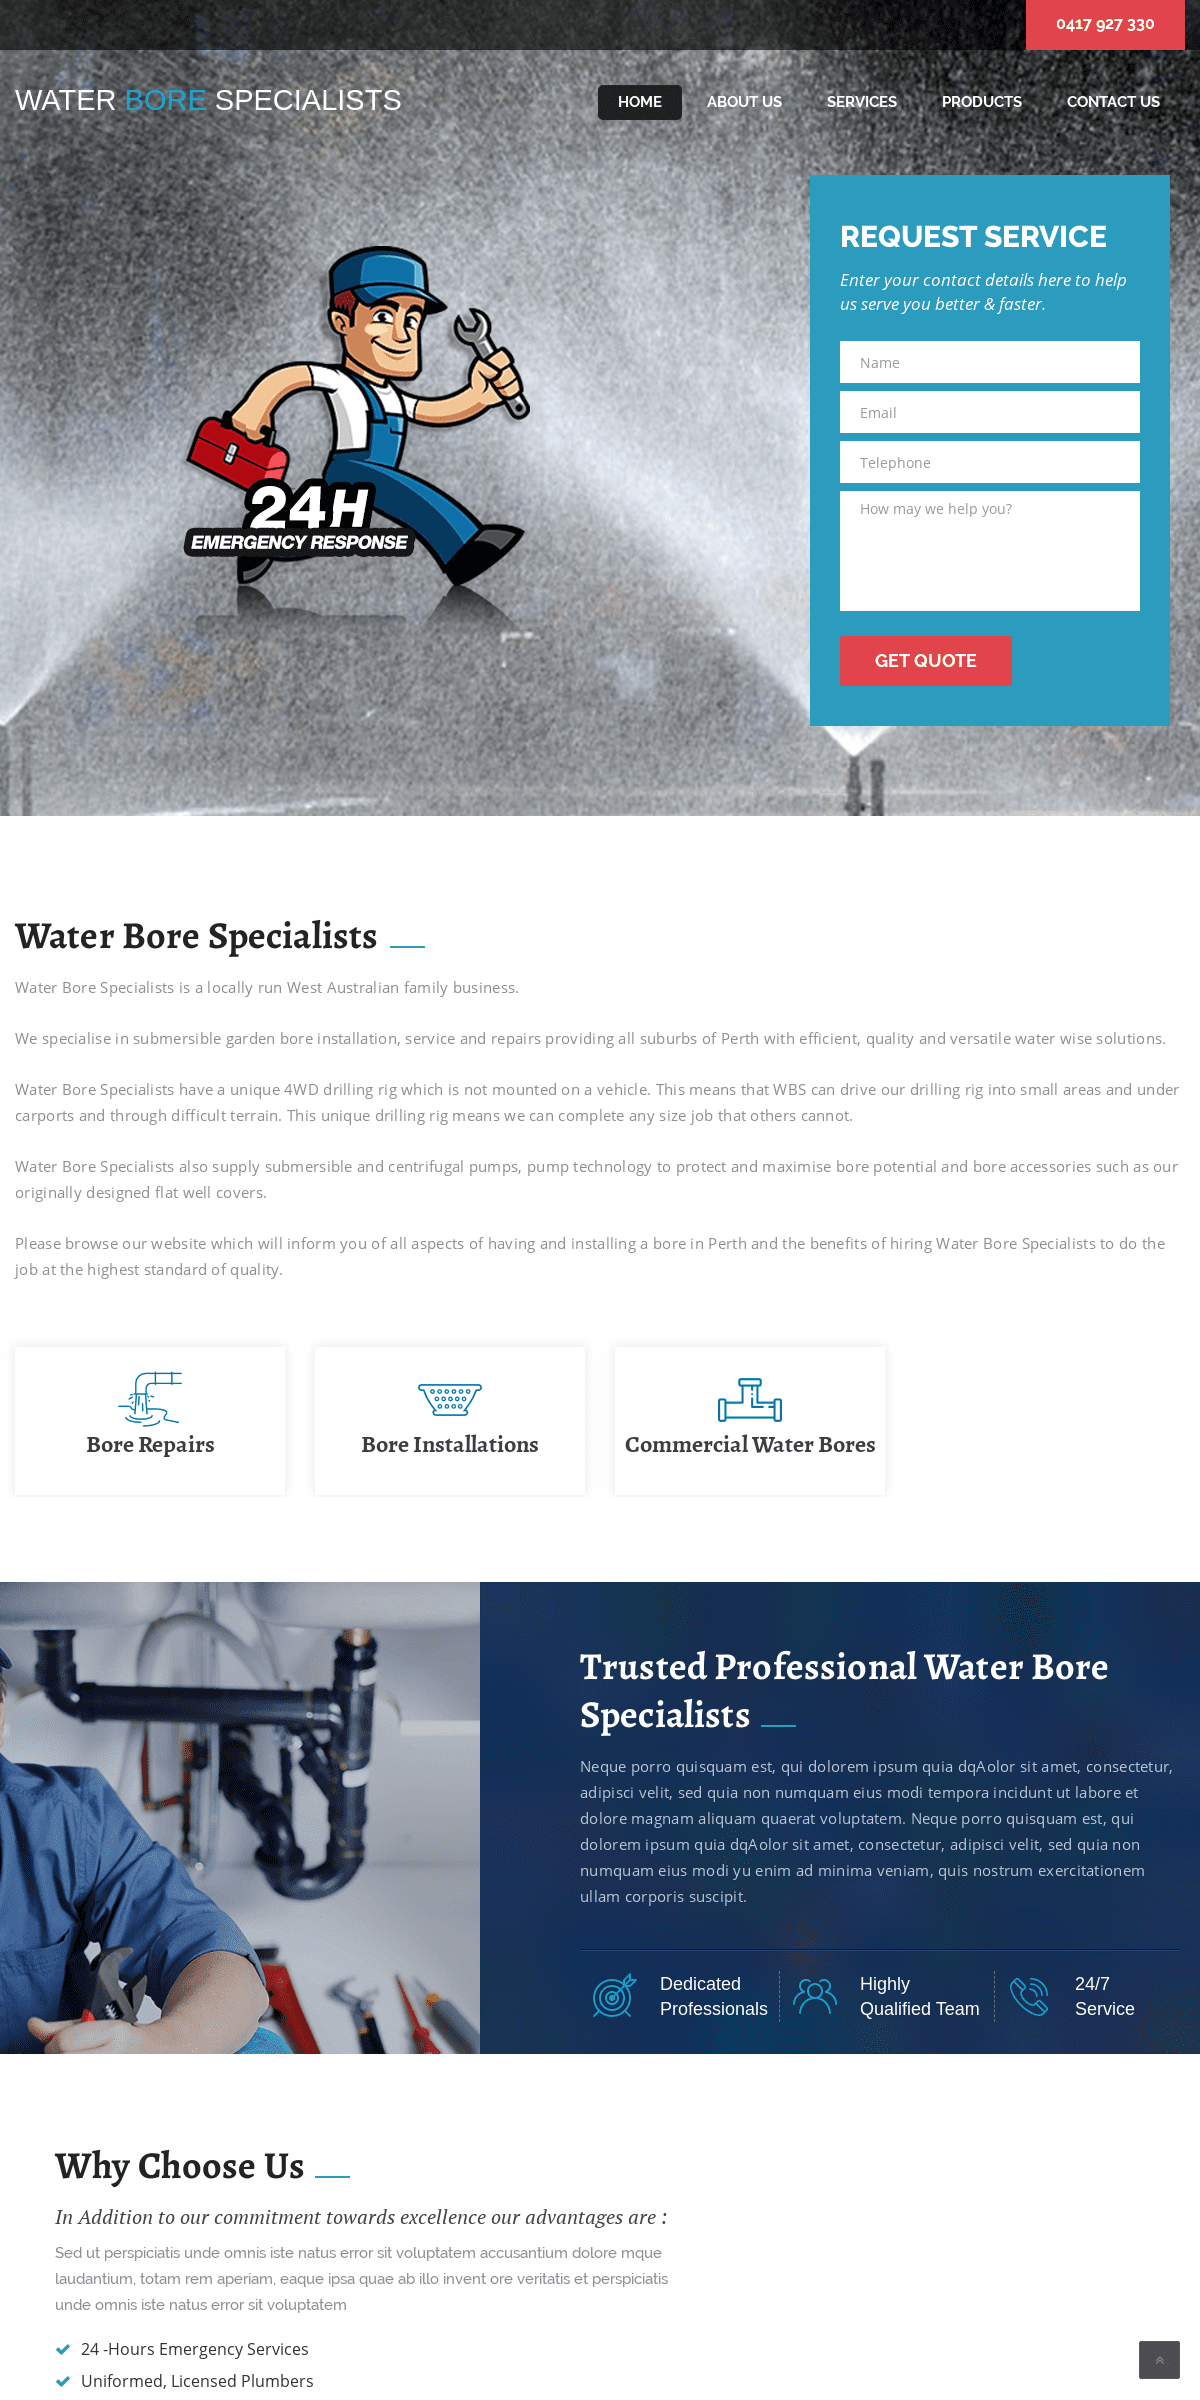 A complete backup of waterborespecialists.com.au